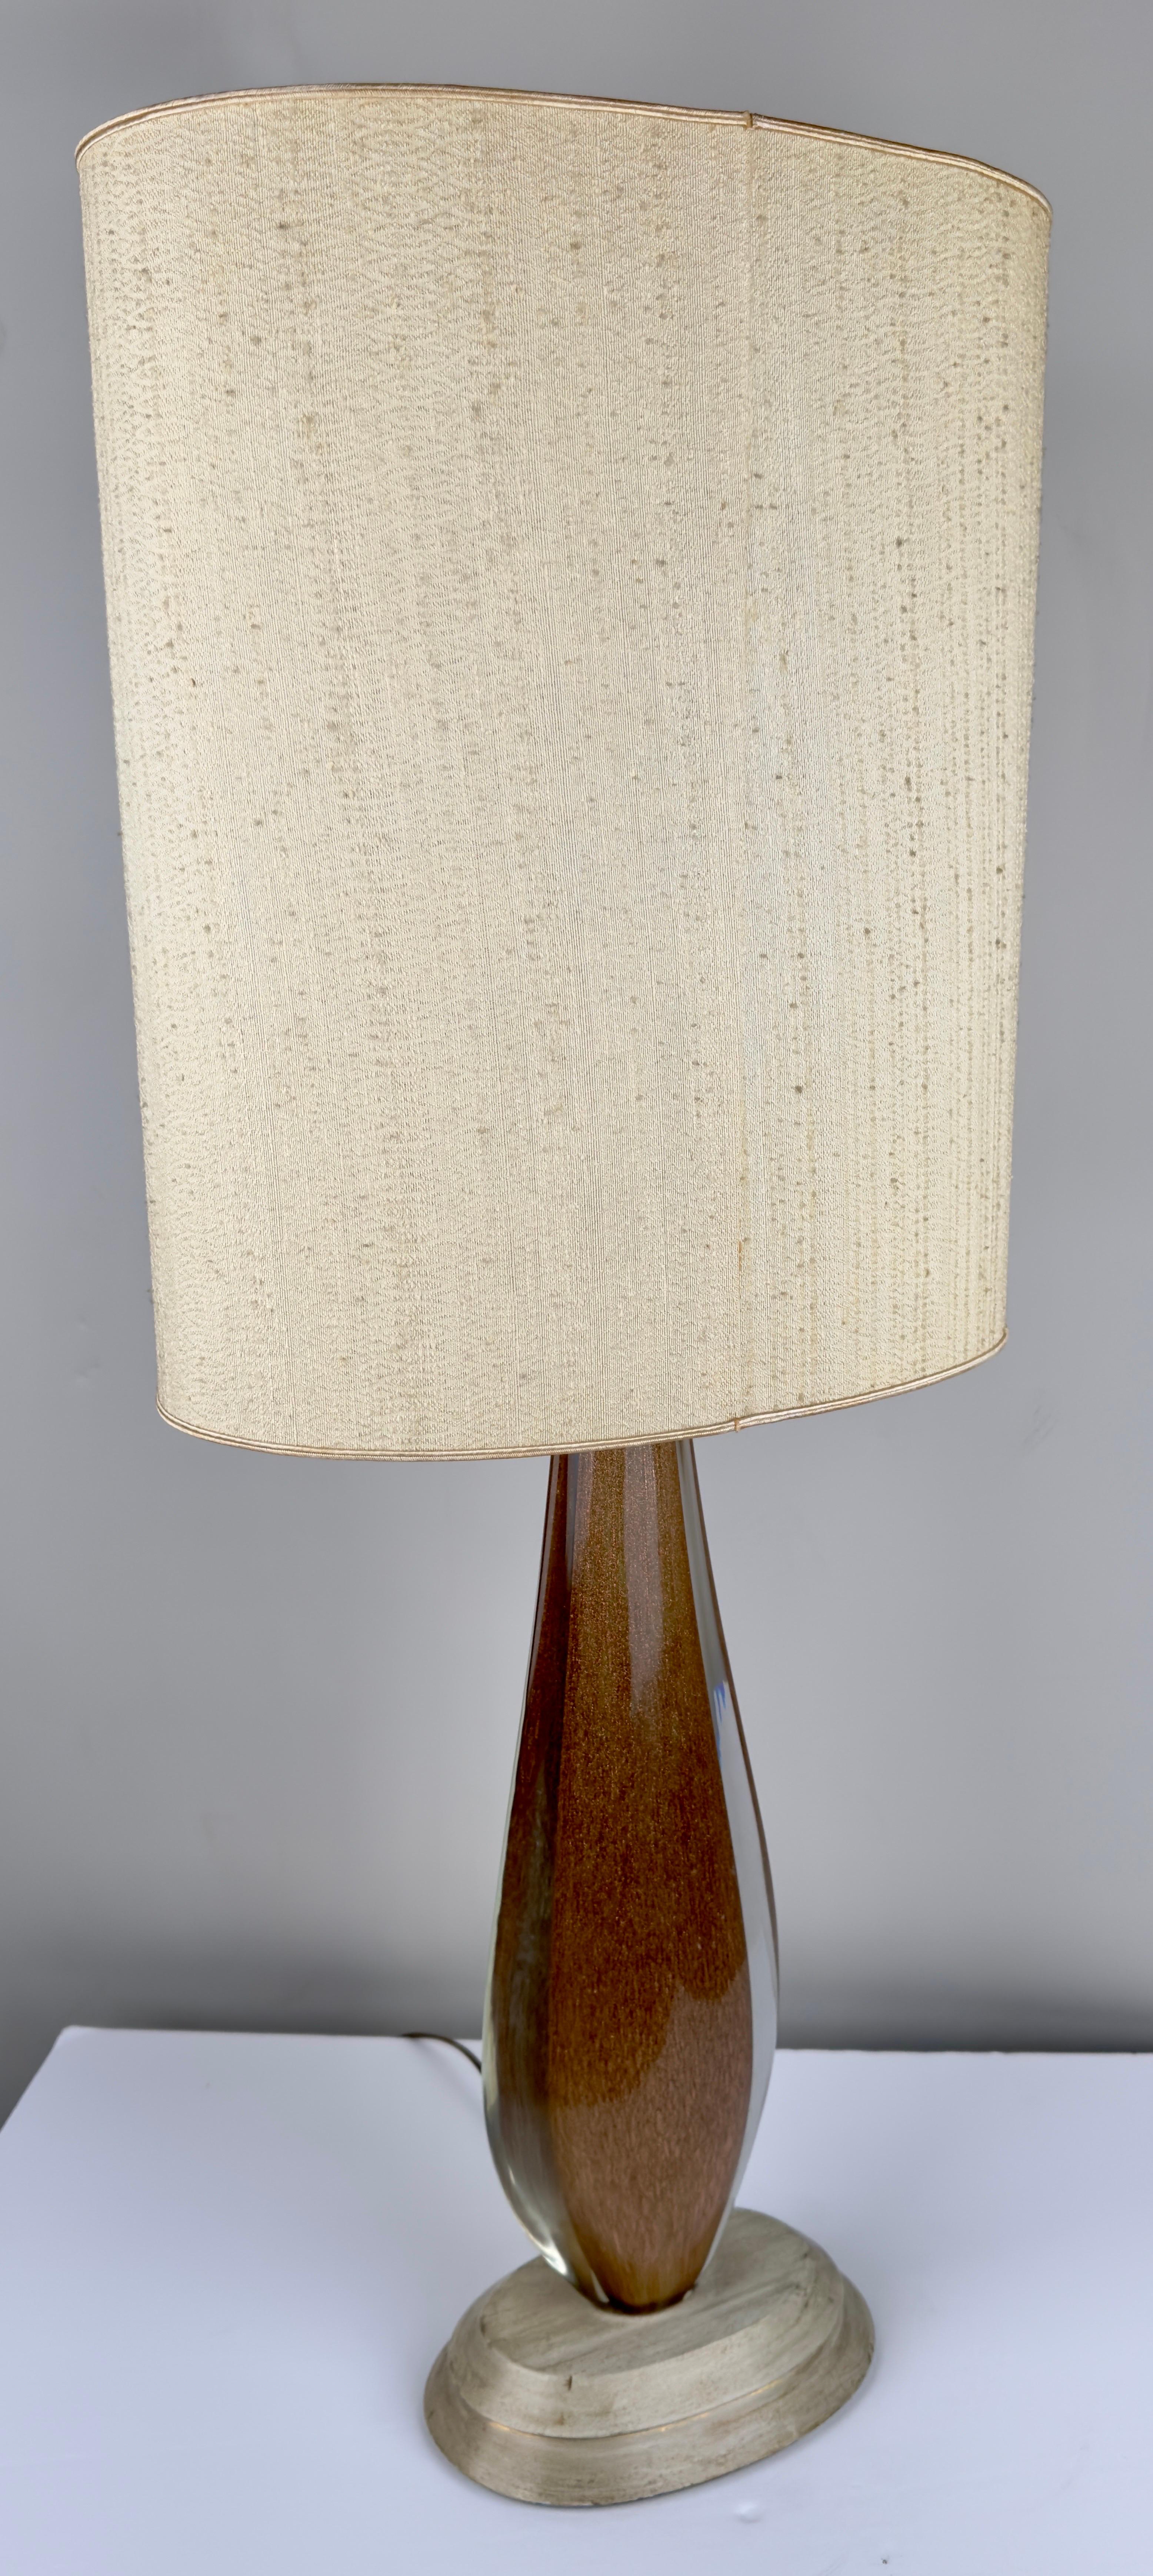  A  Mid Century Modern table lamp. Crafted from art glass adorned with golden grains that visually seem to dance within the glass, the lamp exudes a sense of timeless elegance and allure.

The curvaceous body of the lamp, resplendent in its opulence